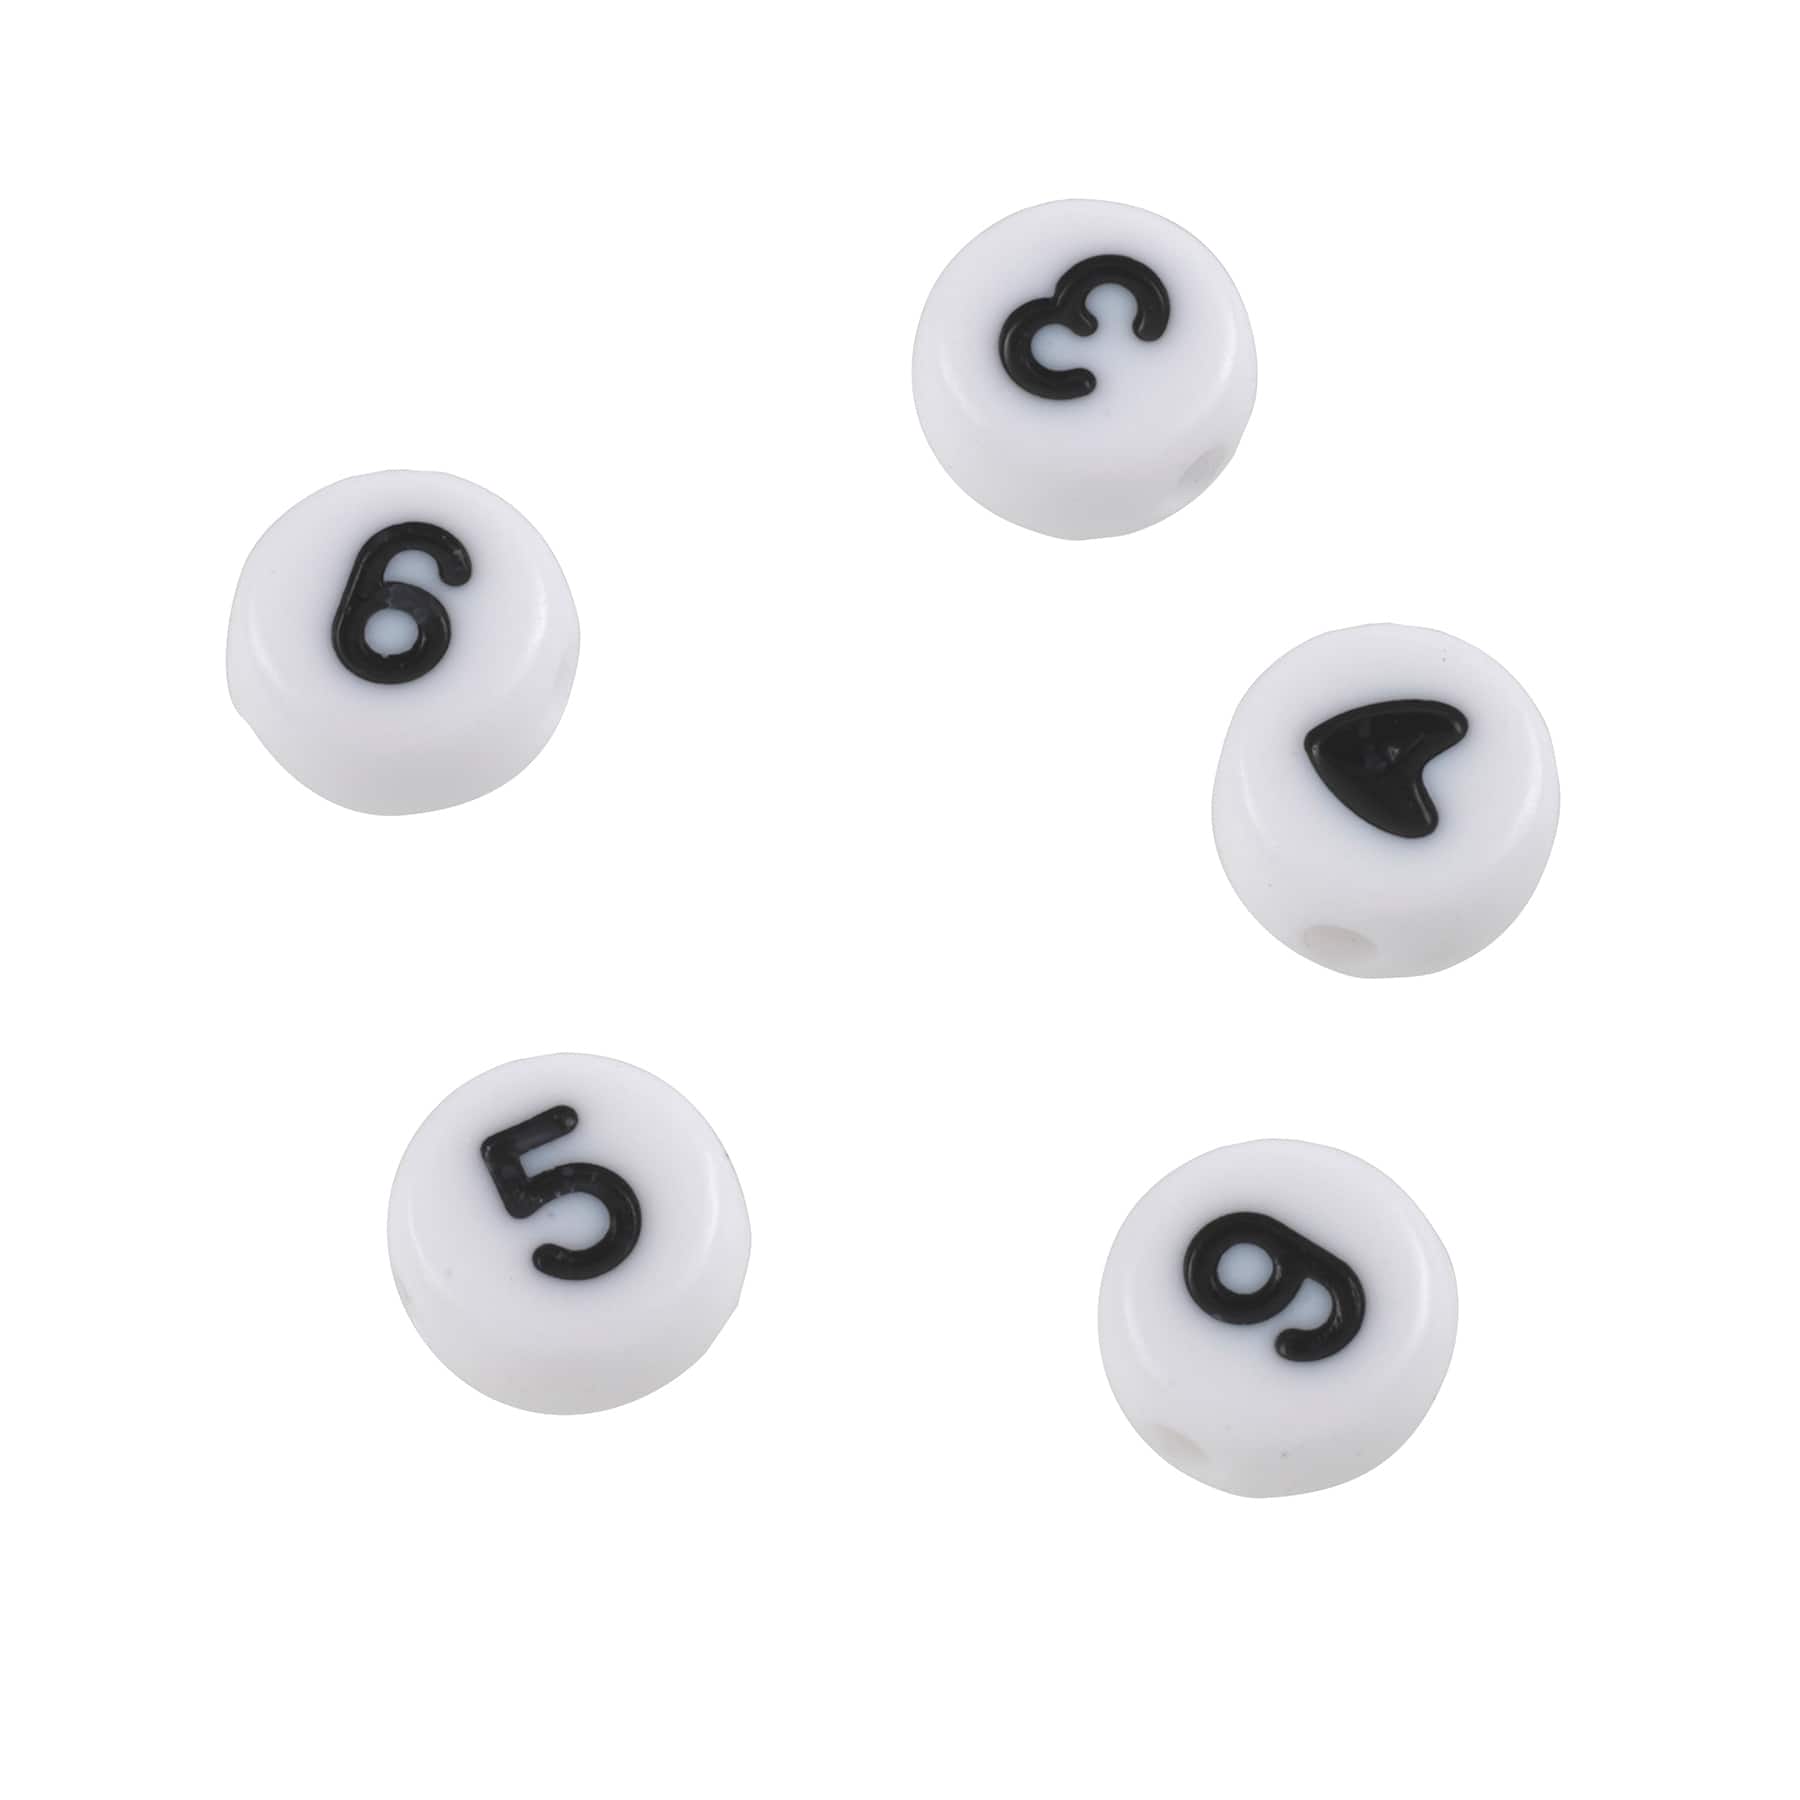 12 Packs: 340 ct. (4,080 total) White Circular Number Beads by Creatology™,  7mm 